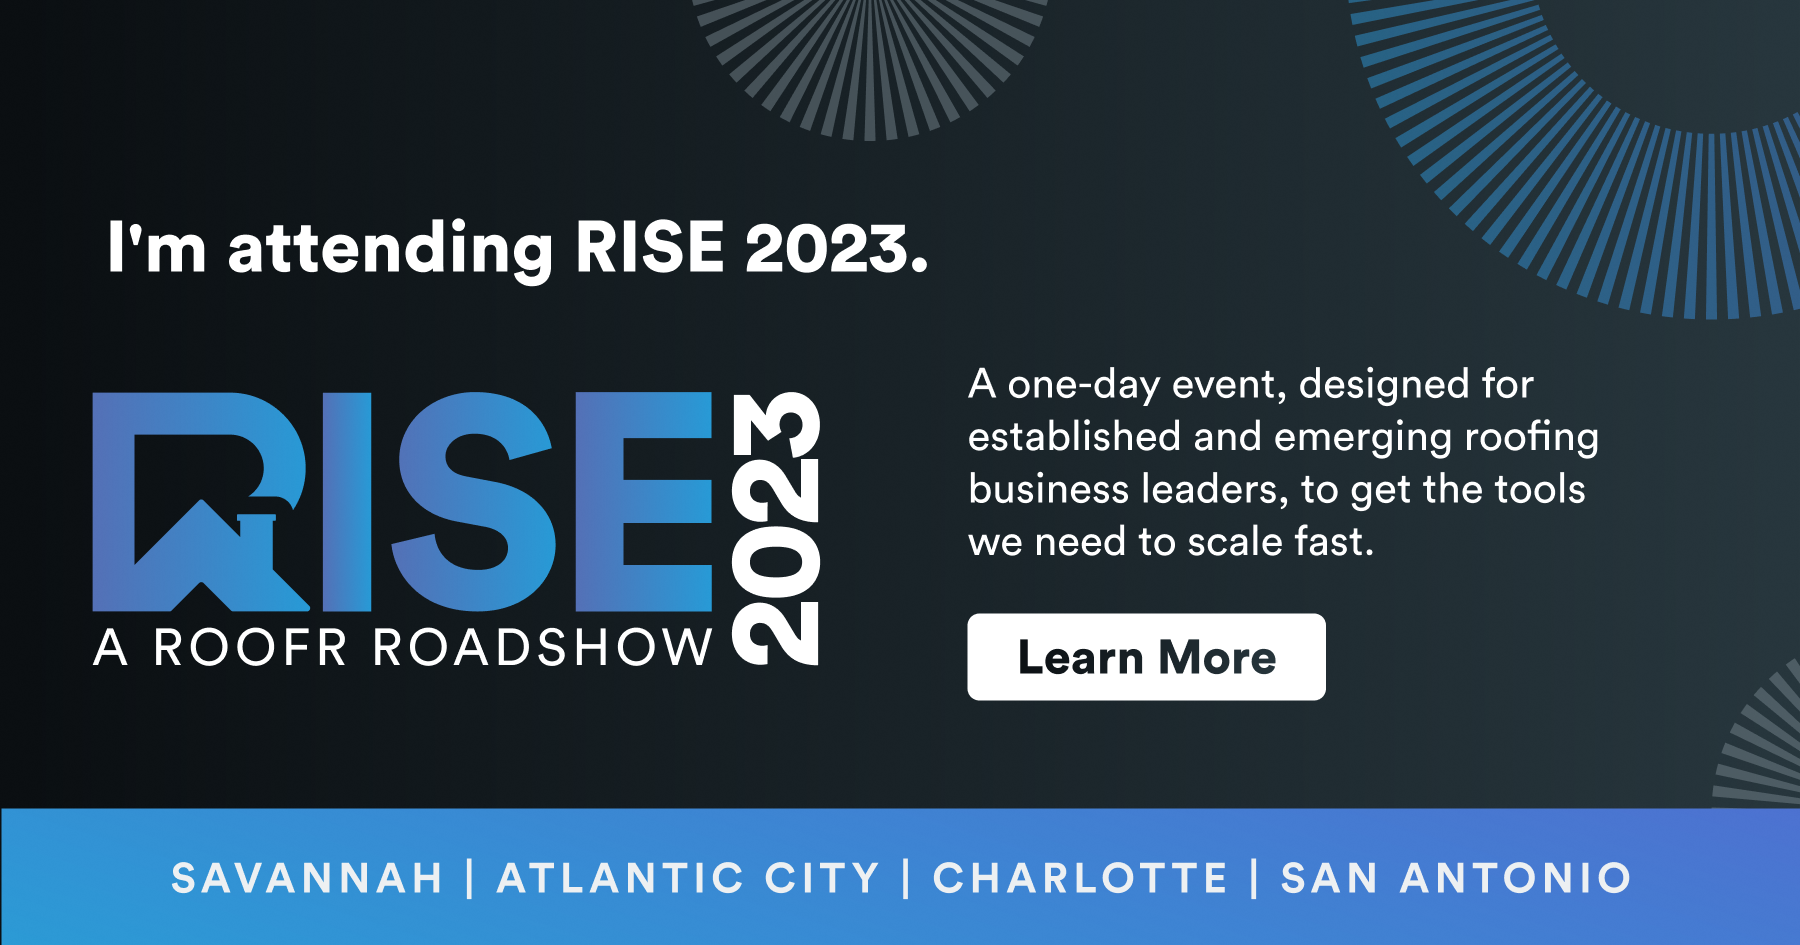 RISE2023-FB-Social-Share-Attendees